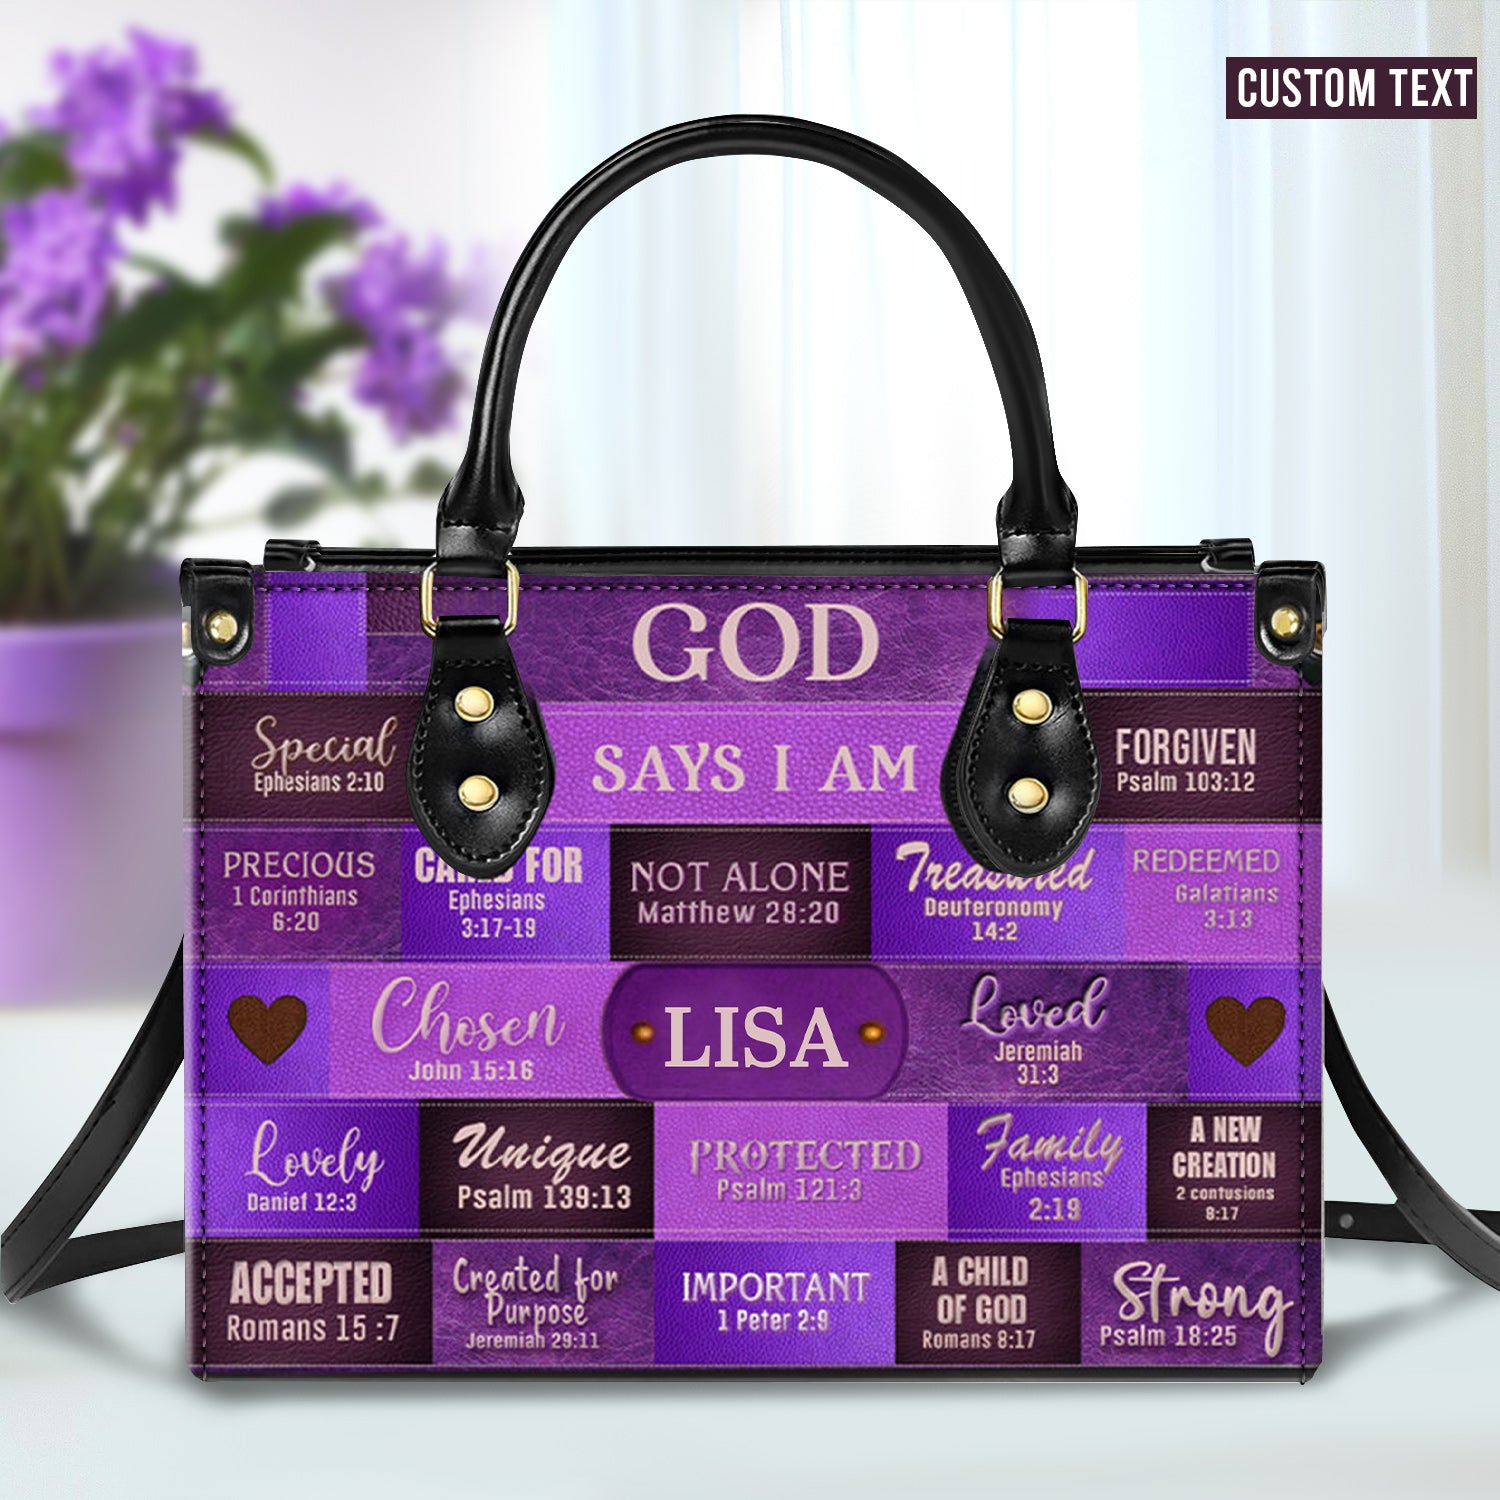 God Says I Am Purple Personalized Leather Handbag Bags, Gifts for Women